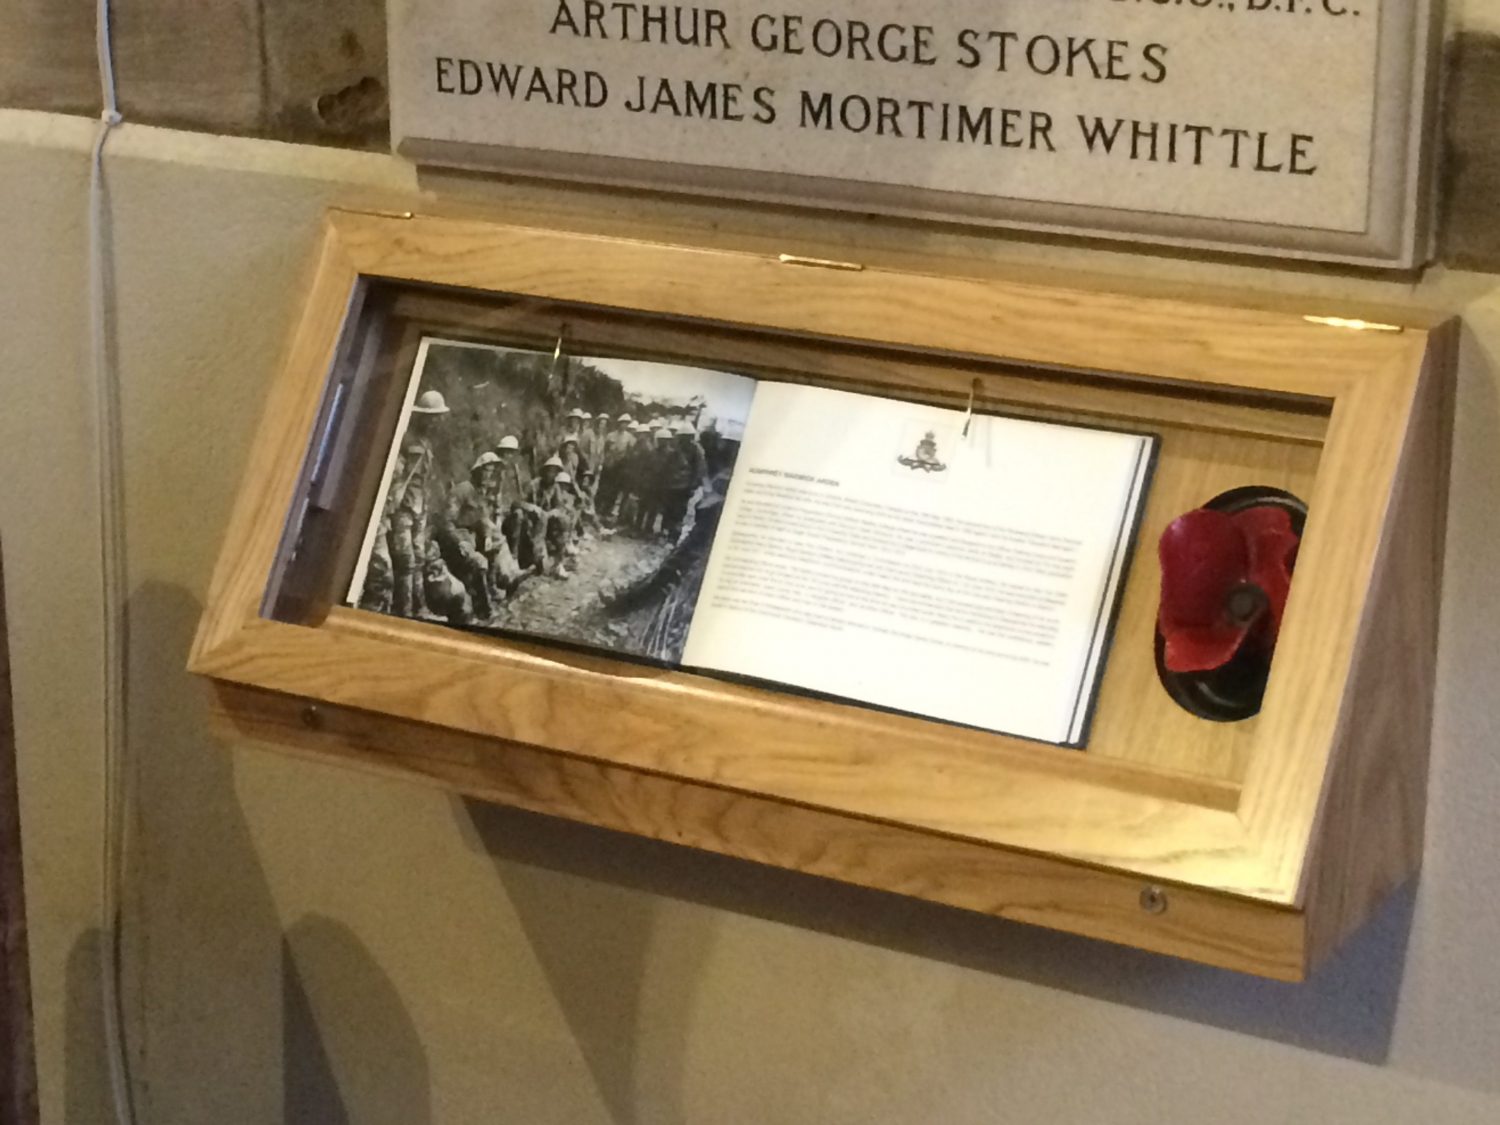 Ceramic poppy from the Tower of London included